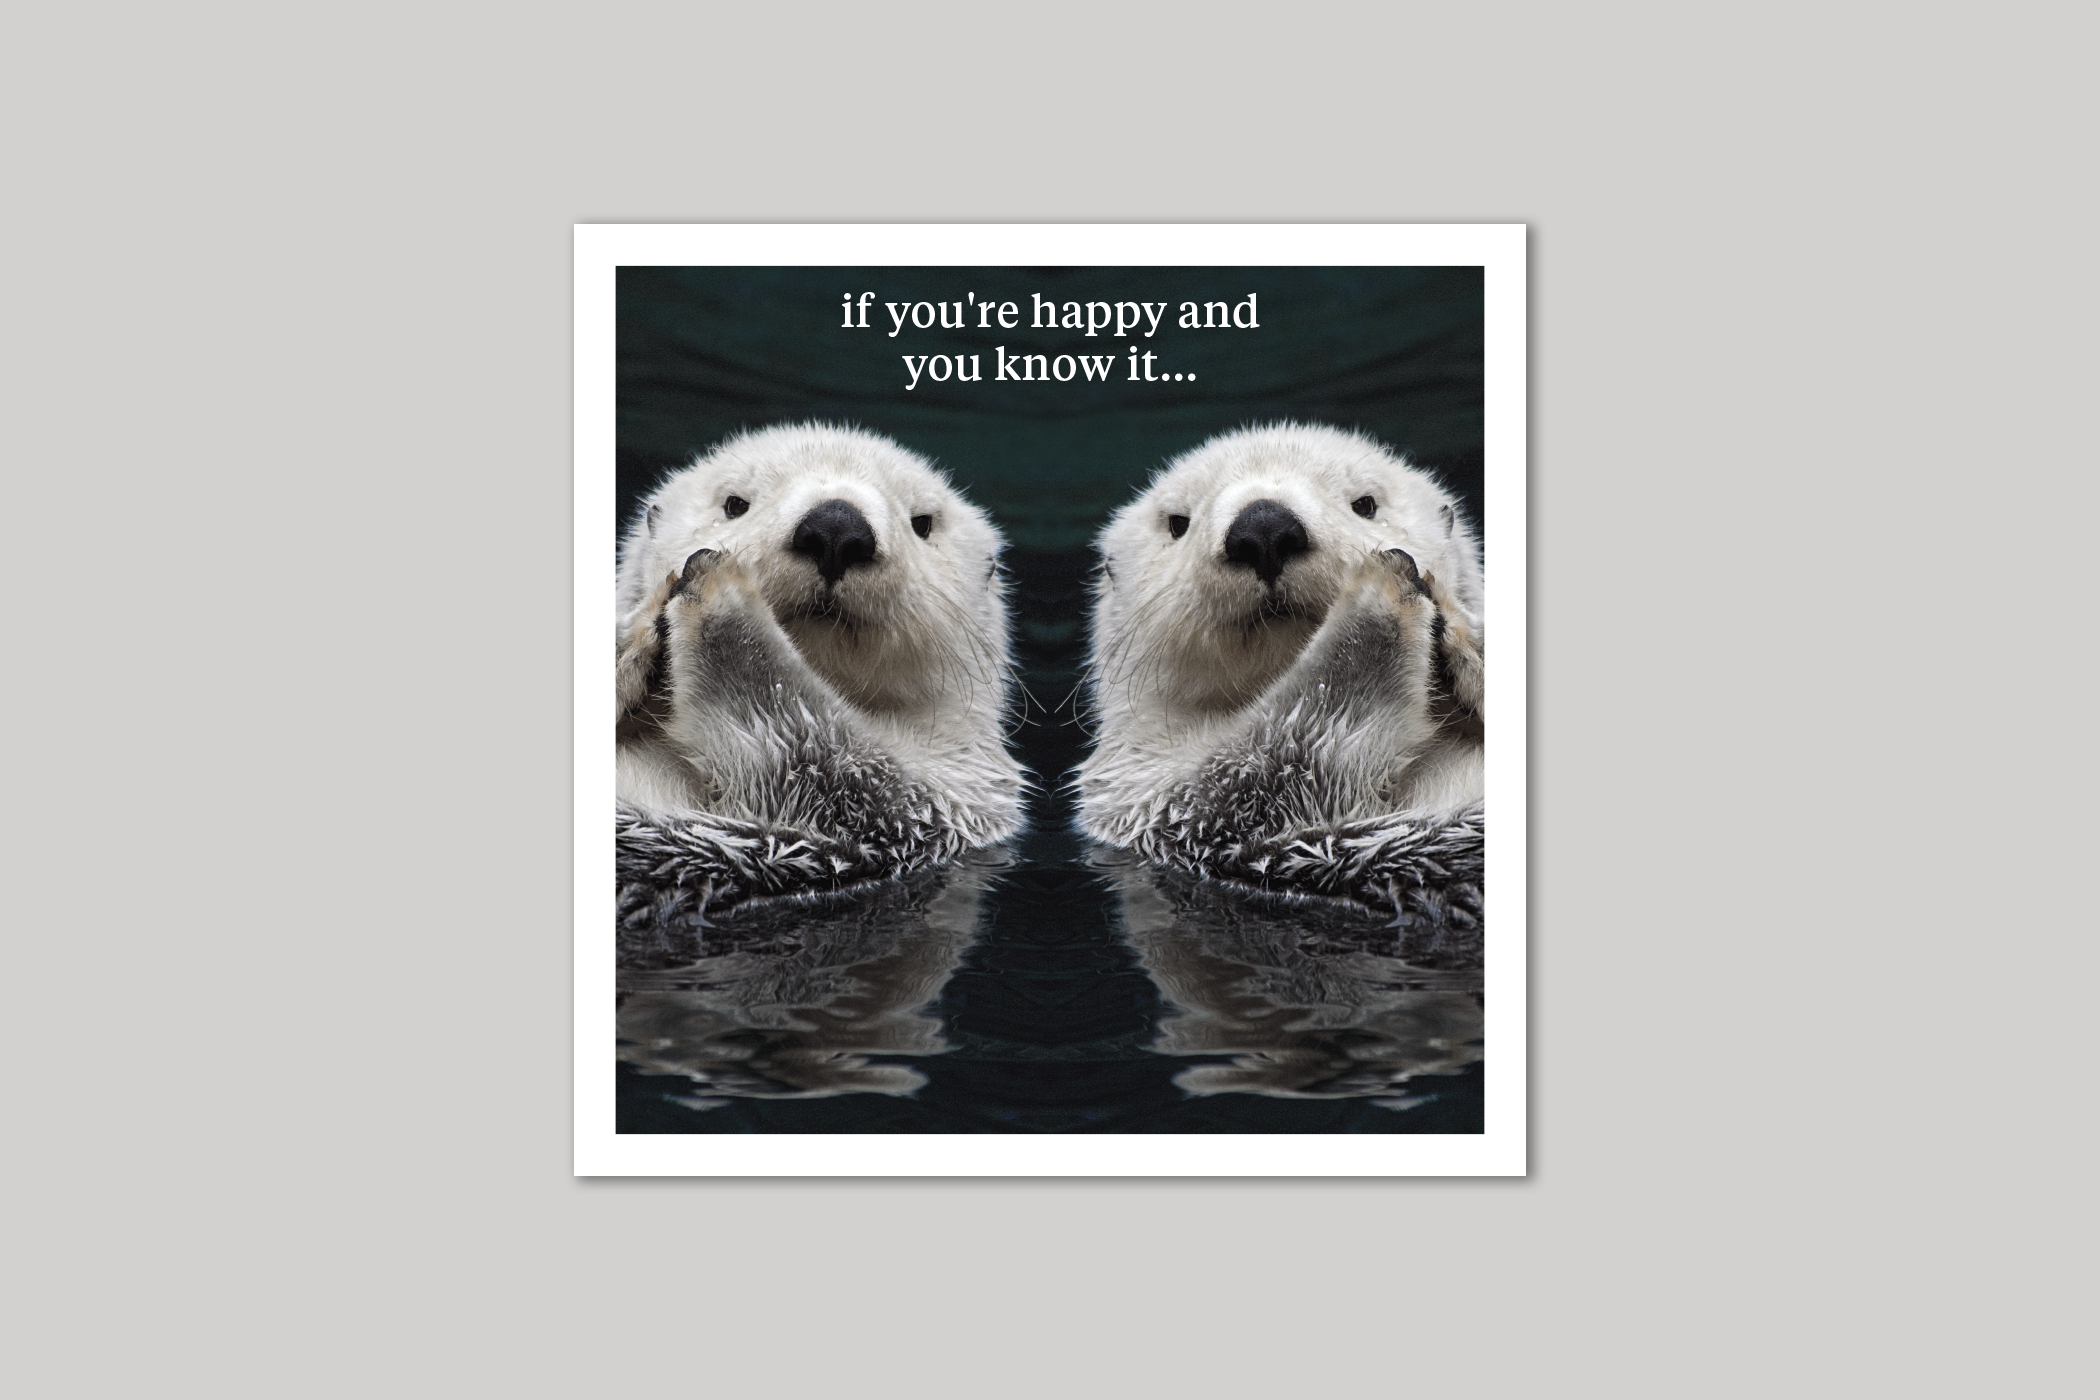 Clap Your Hands quirky animal portrait from Curious World range of greeting cards by Icon.